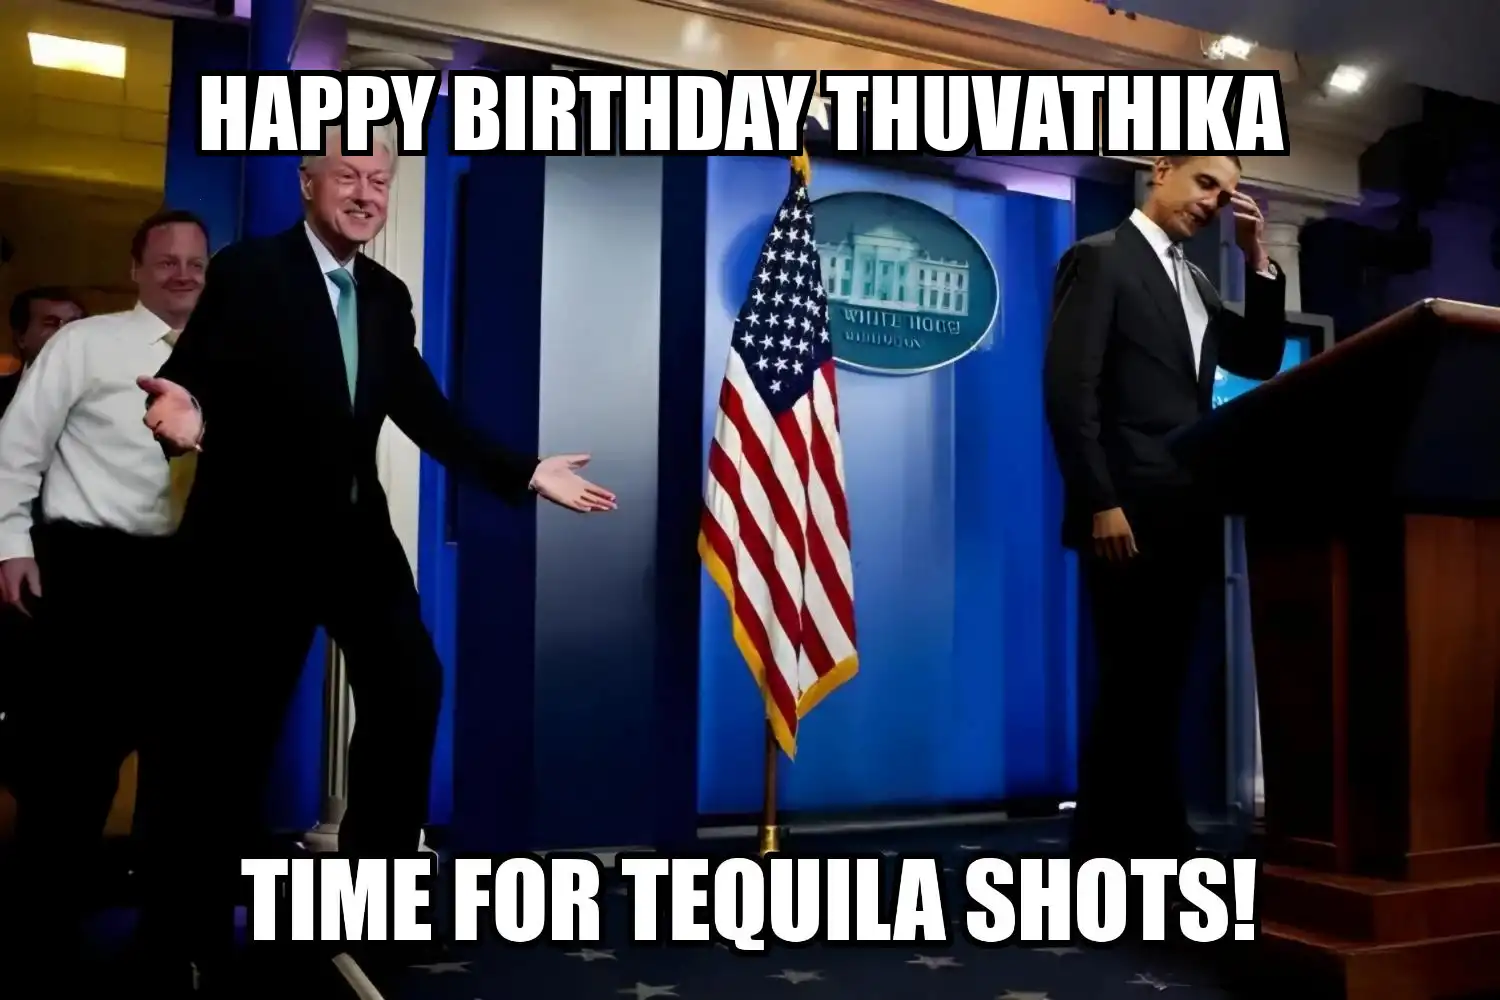 Happy Birthday Thuvathika Time For Tequila Shots Memes